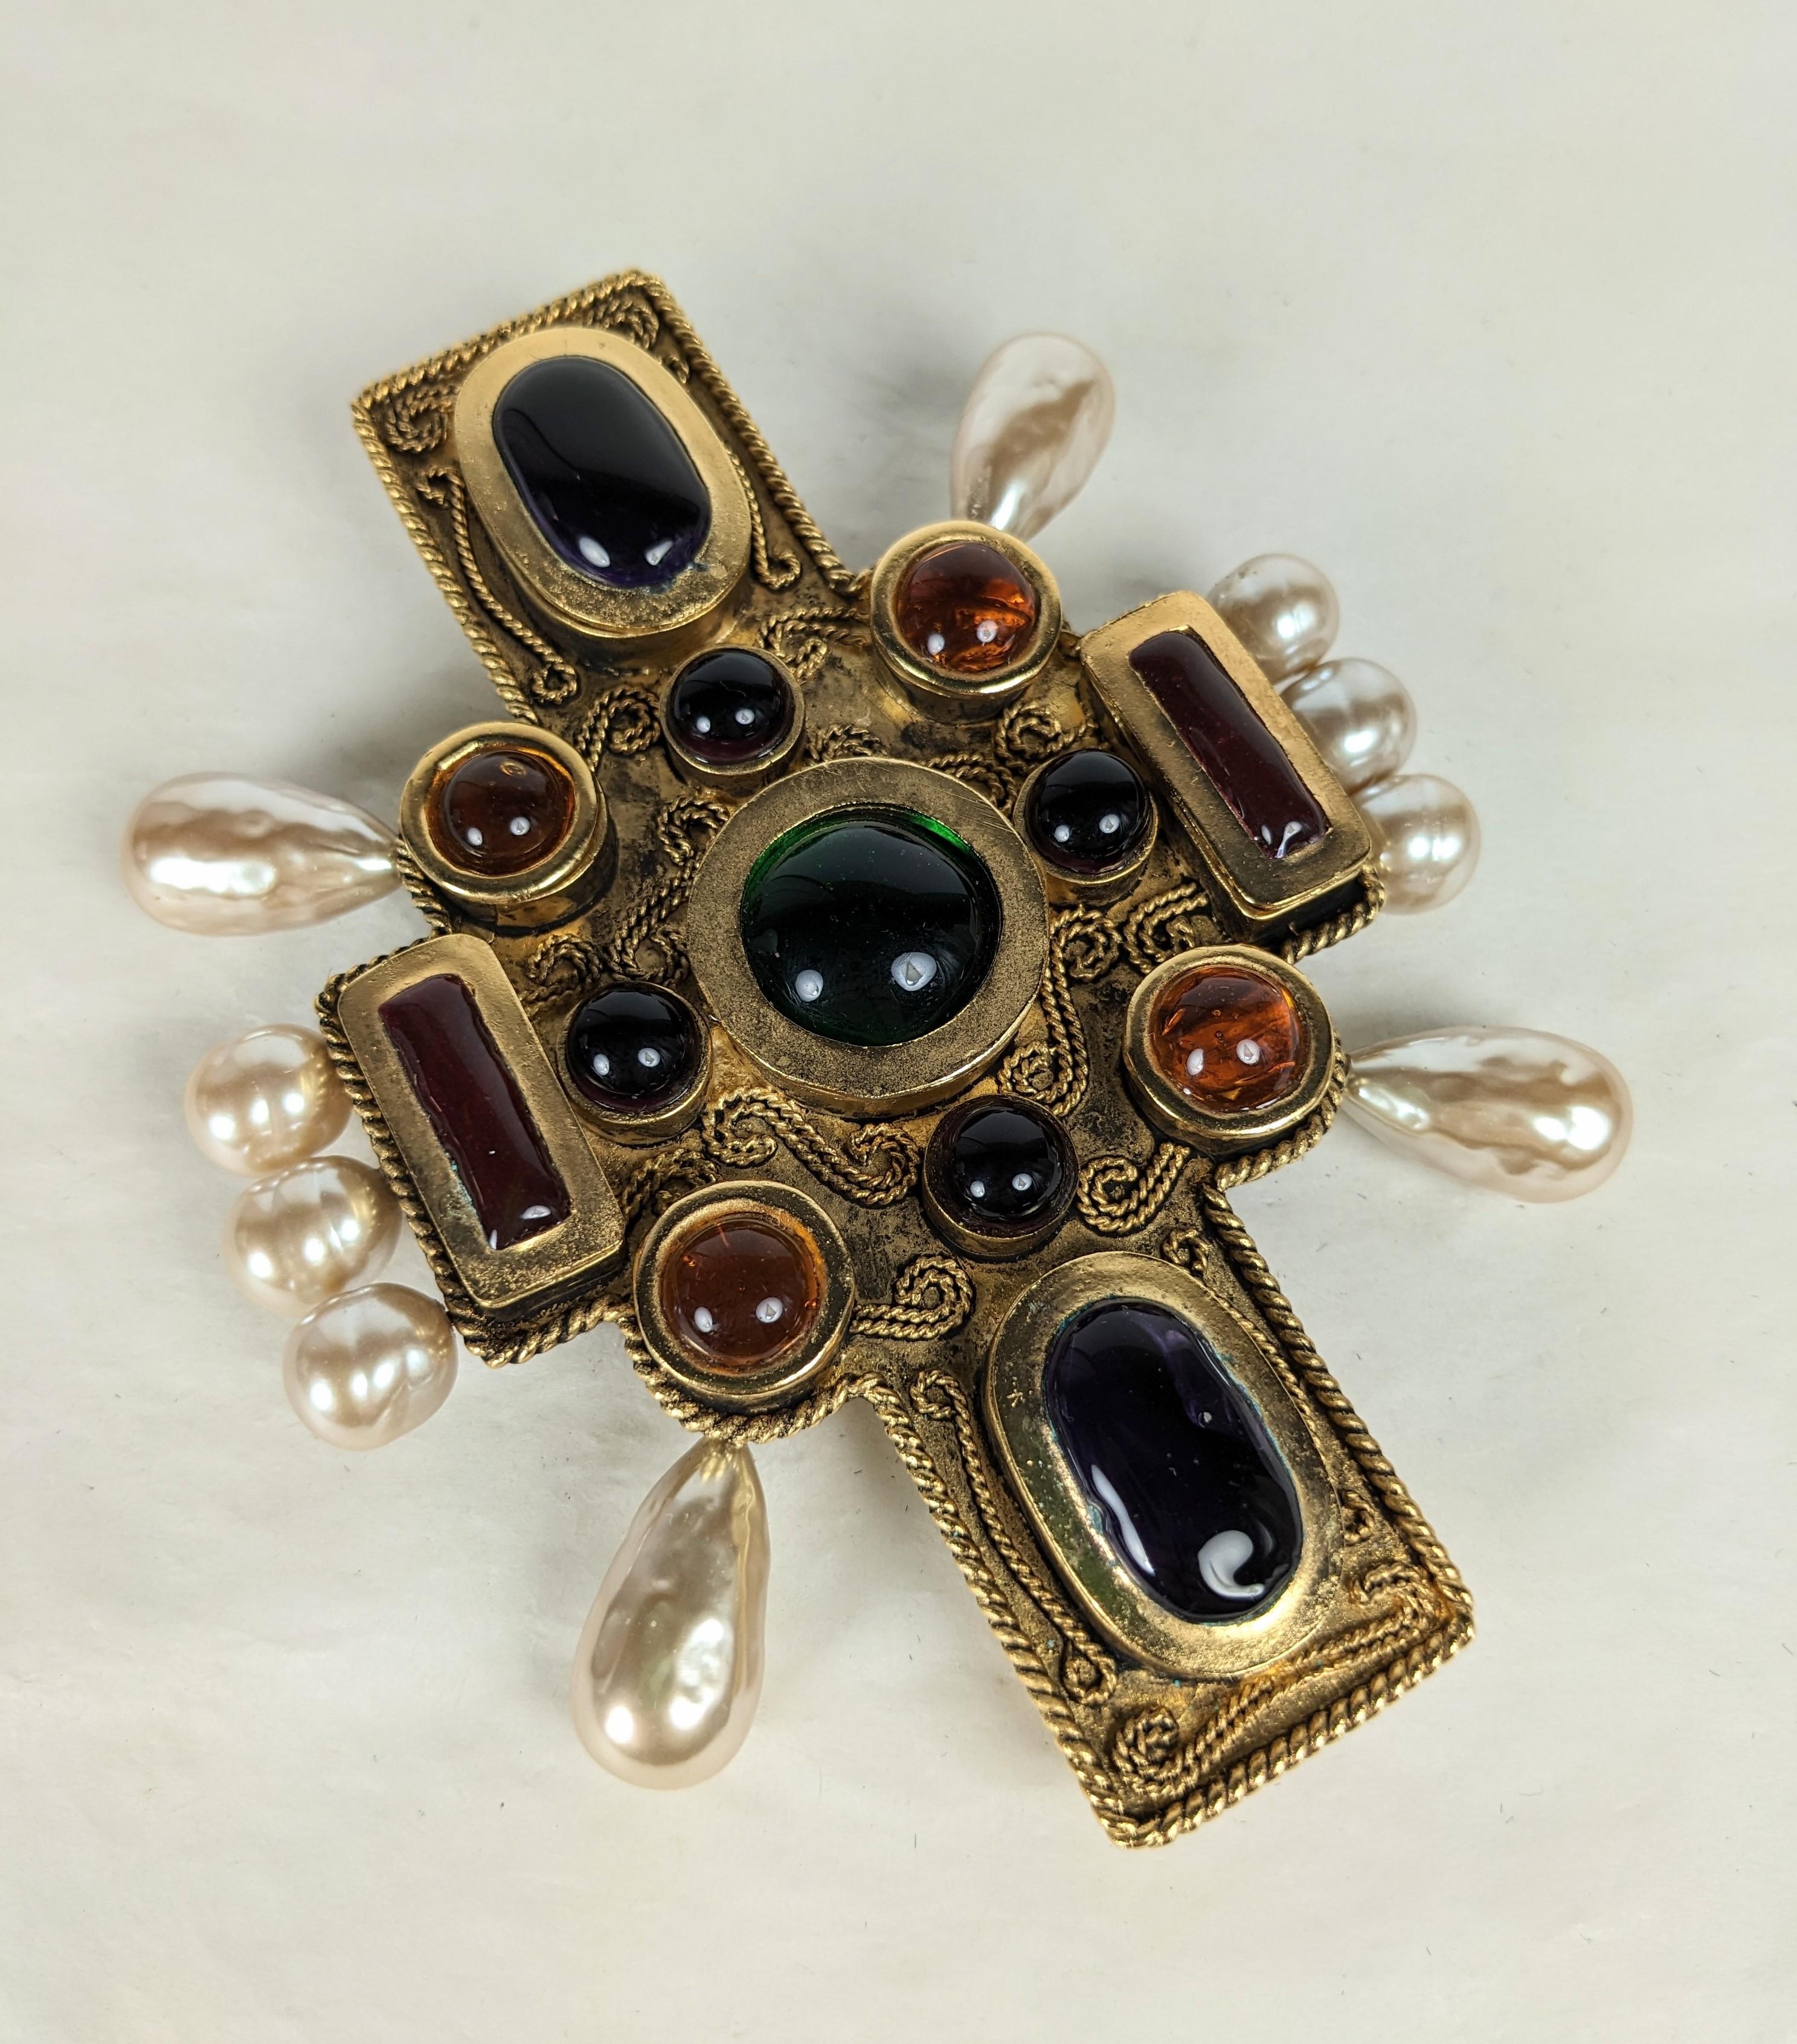 Chanel Massive Byzantine Cross Pendant Brooch by Maison Gripoix In Excellent Condition For Sale In New York, NY